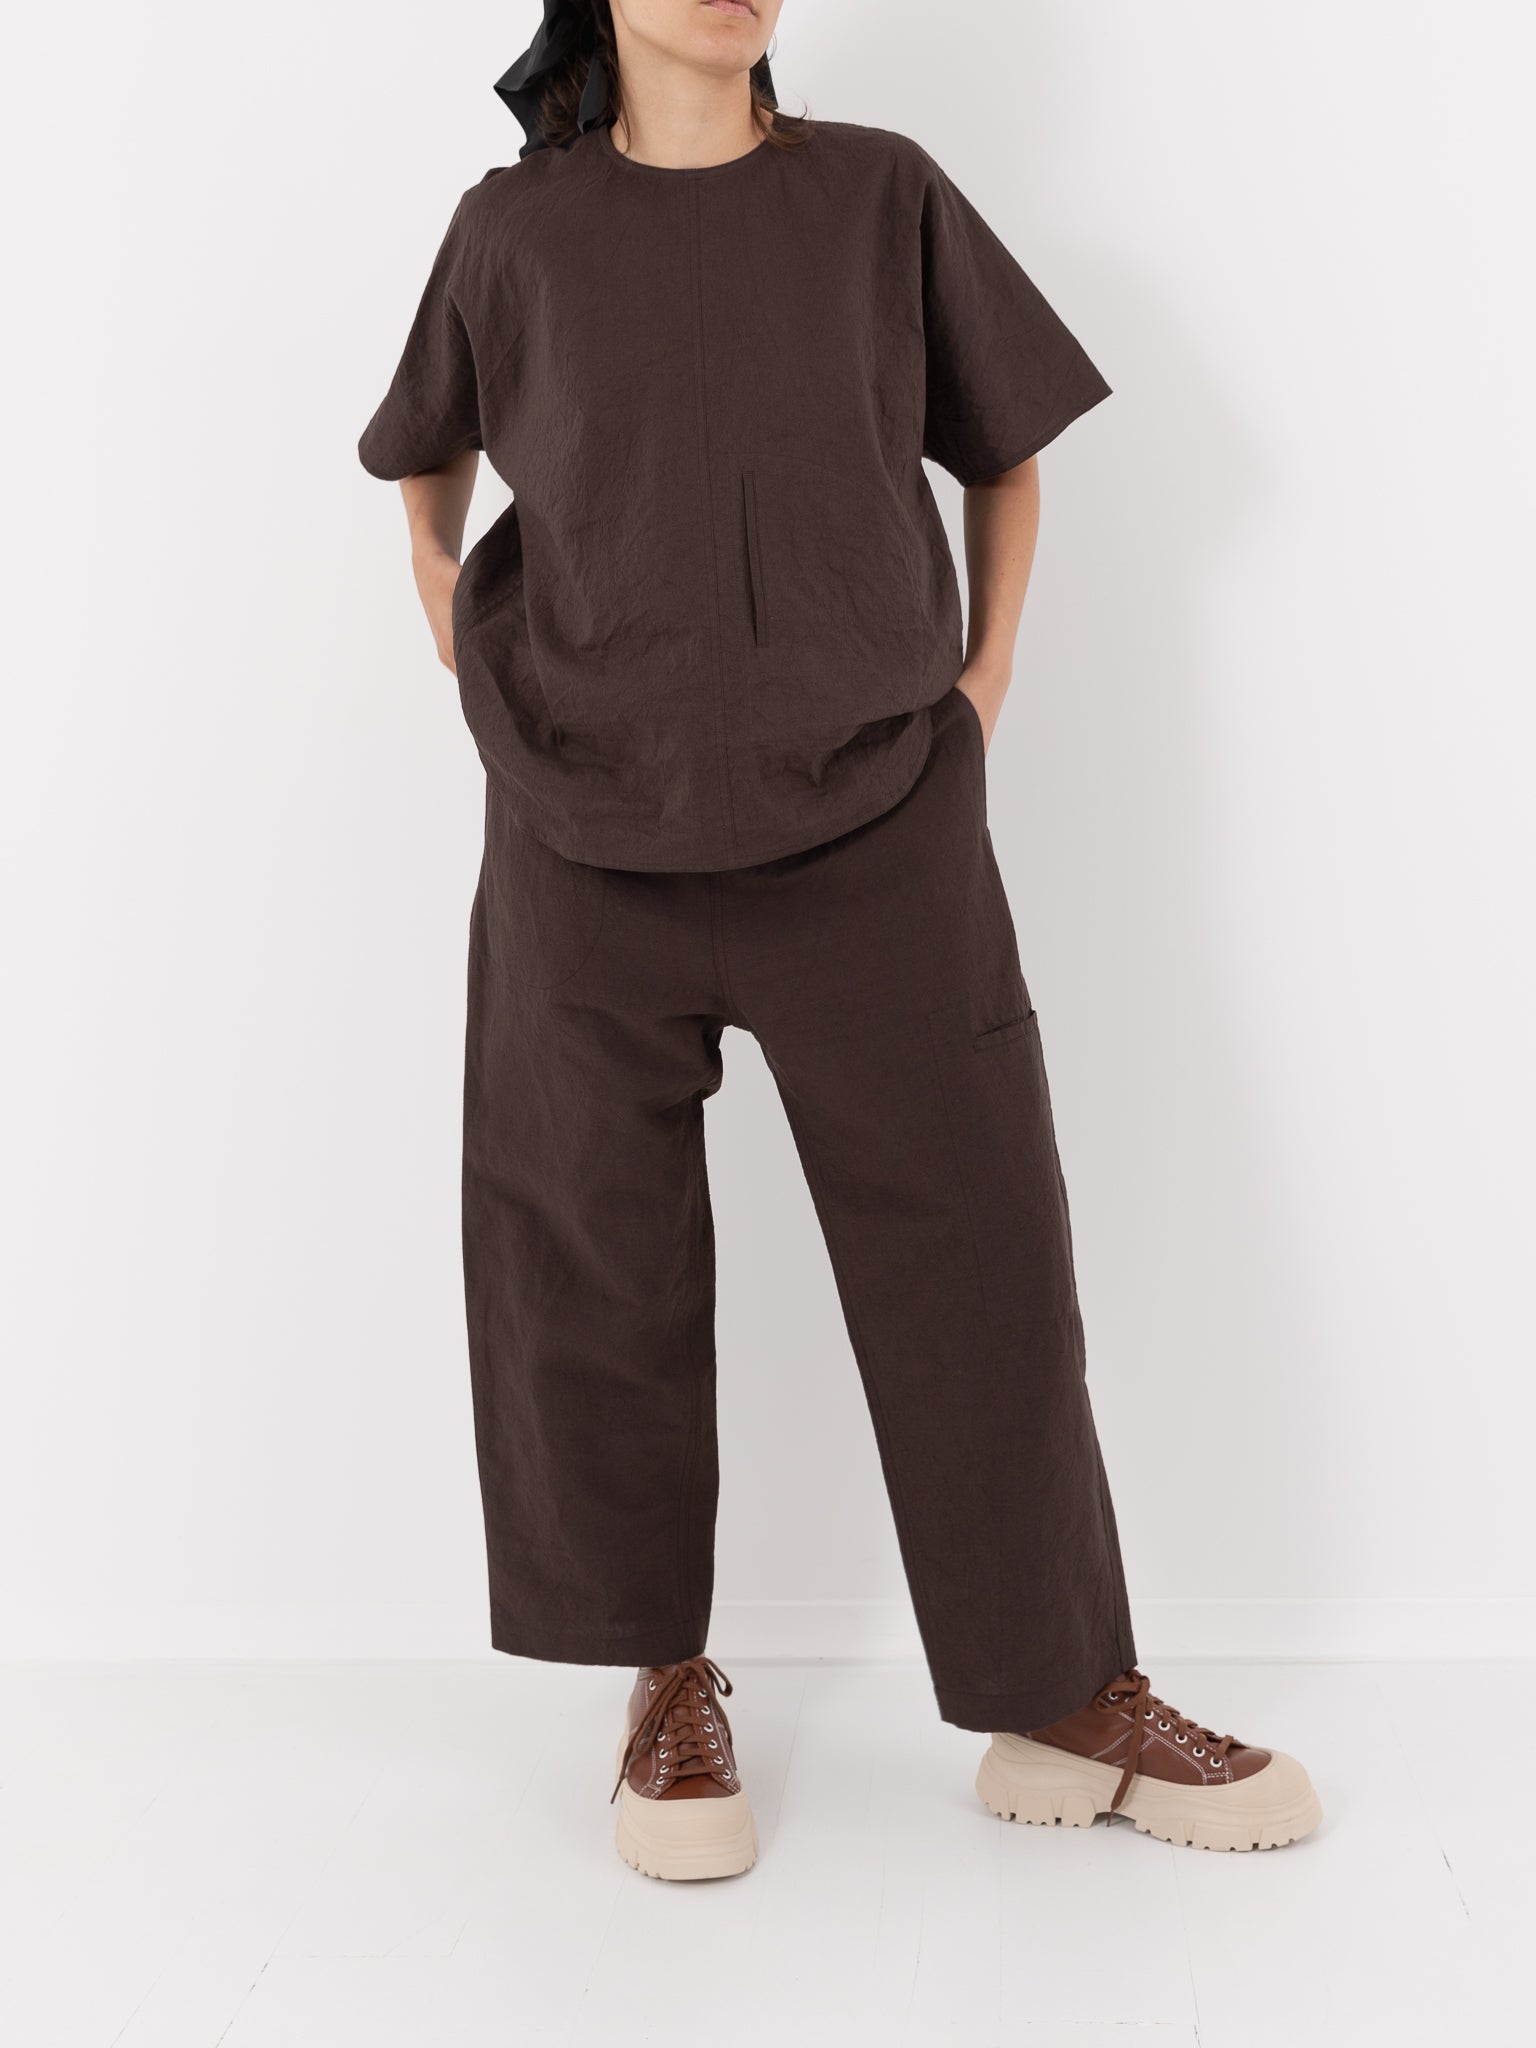 Sofie D'Hoore Pluck Pant, Cacao - Worthwhile, Inc.